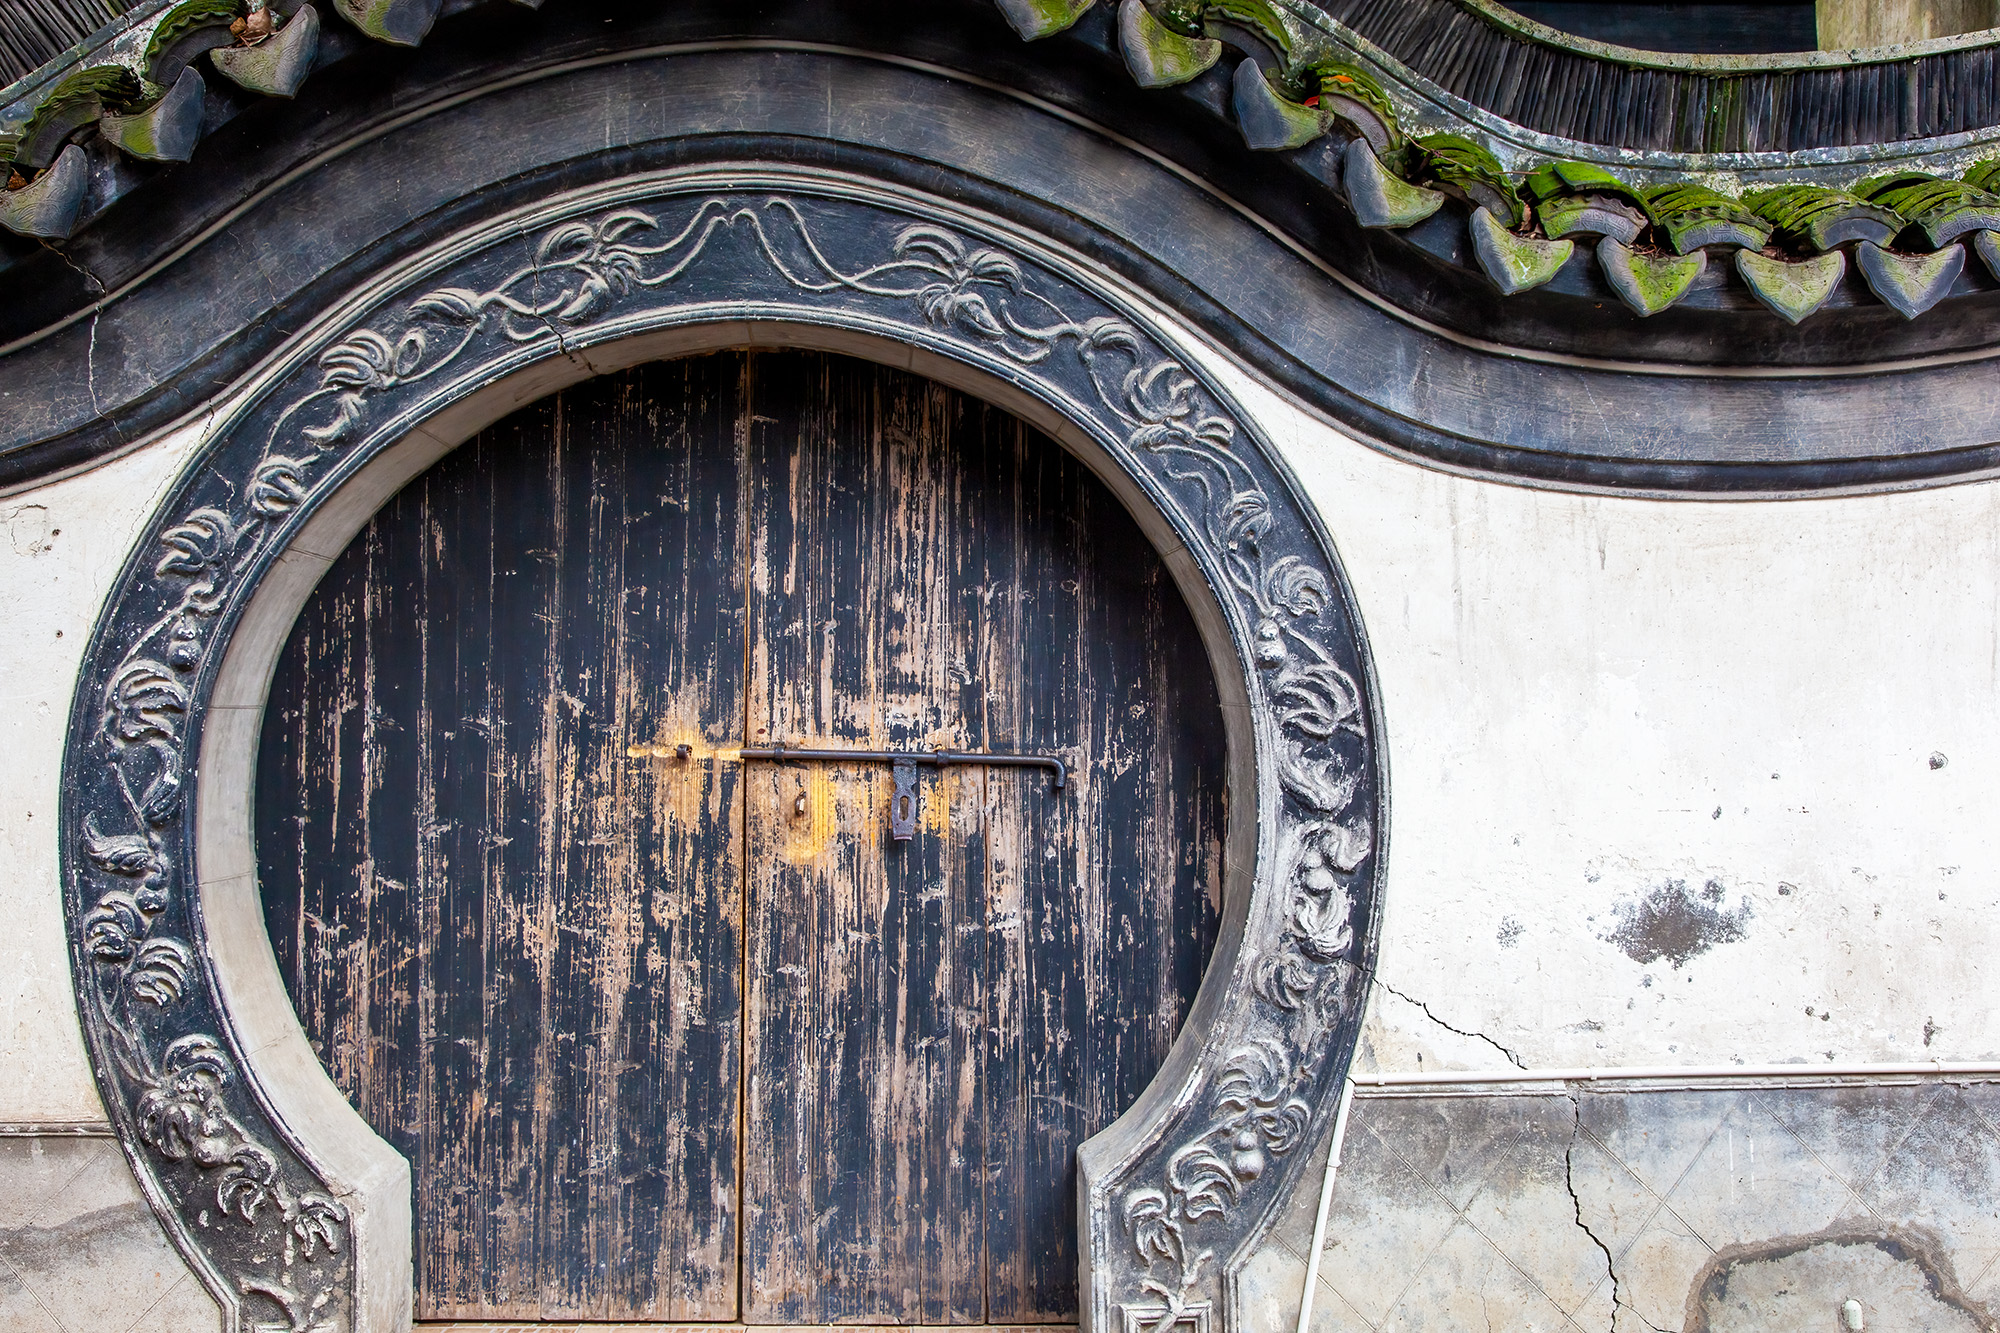 This snapshot captures the serene beauty of the Yu Yuan Gardens in Shanghai. The focal point is a circular door, its arched top...